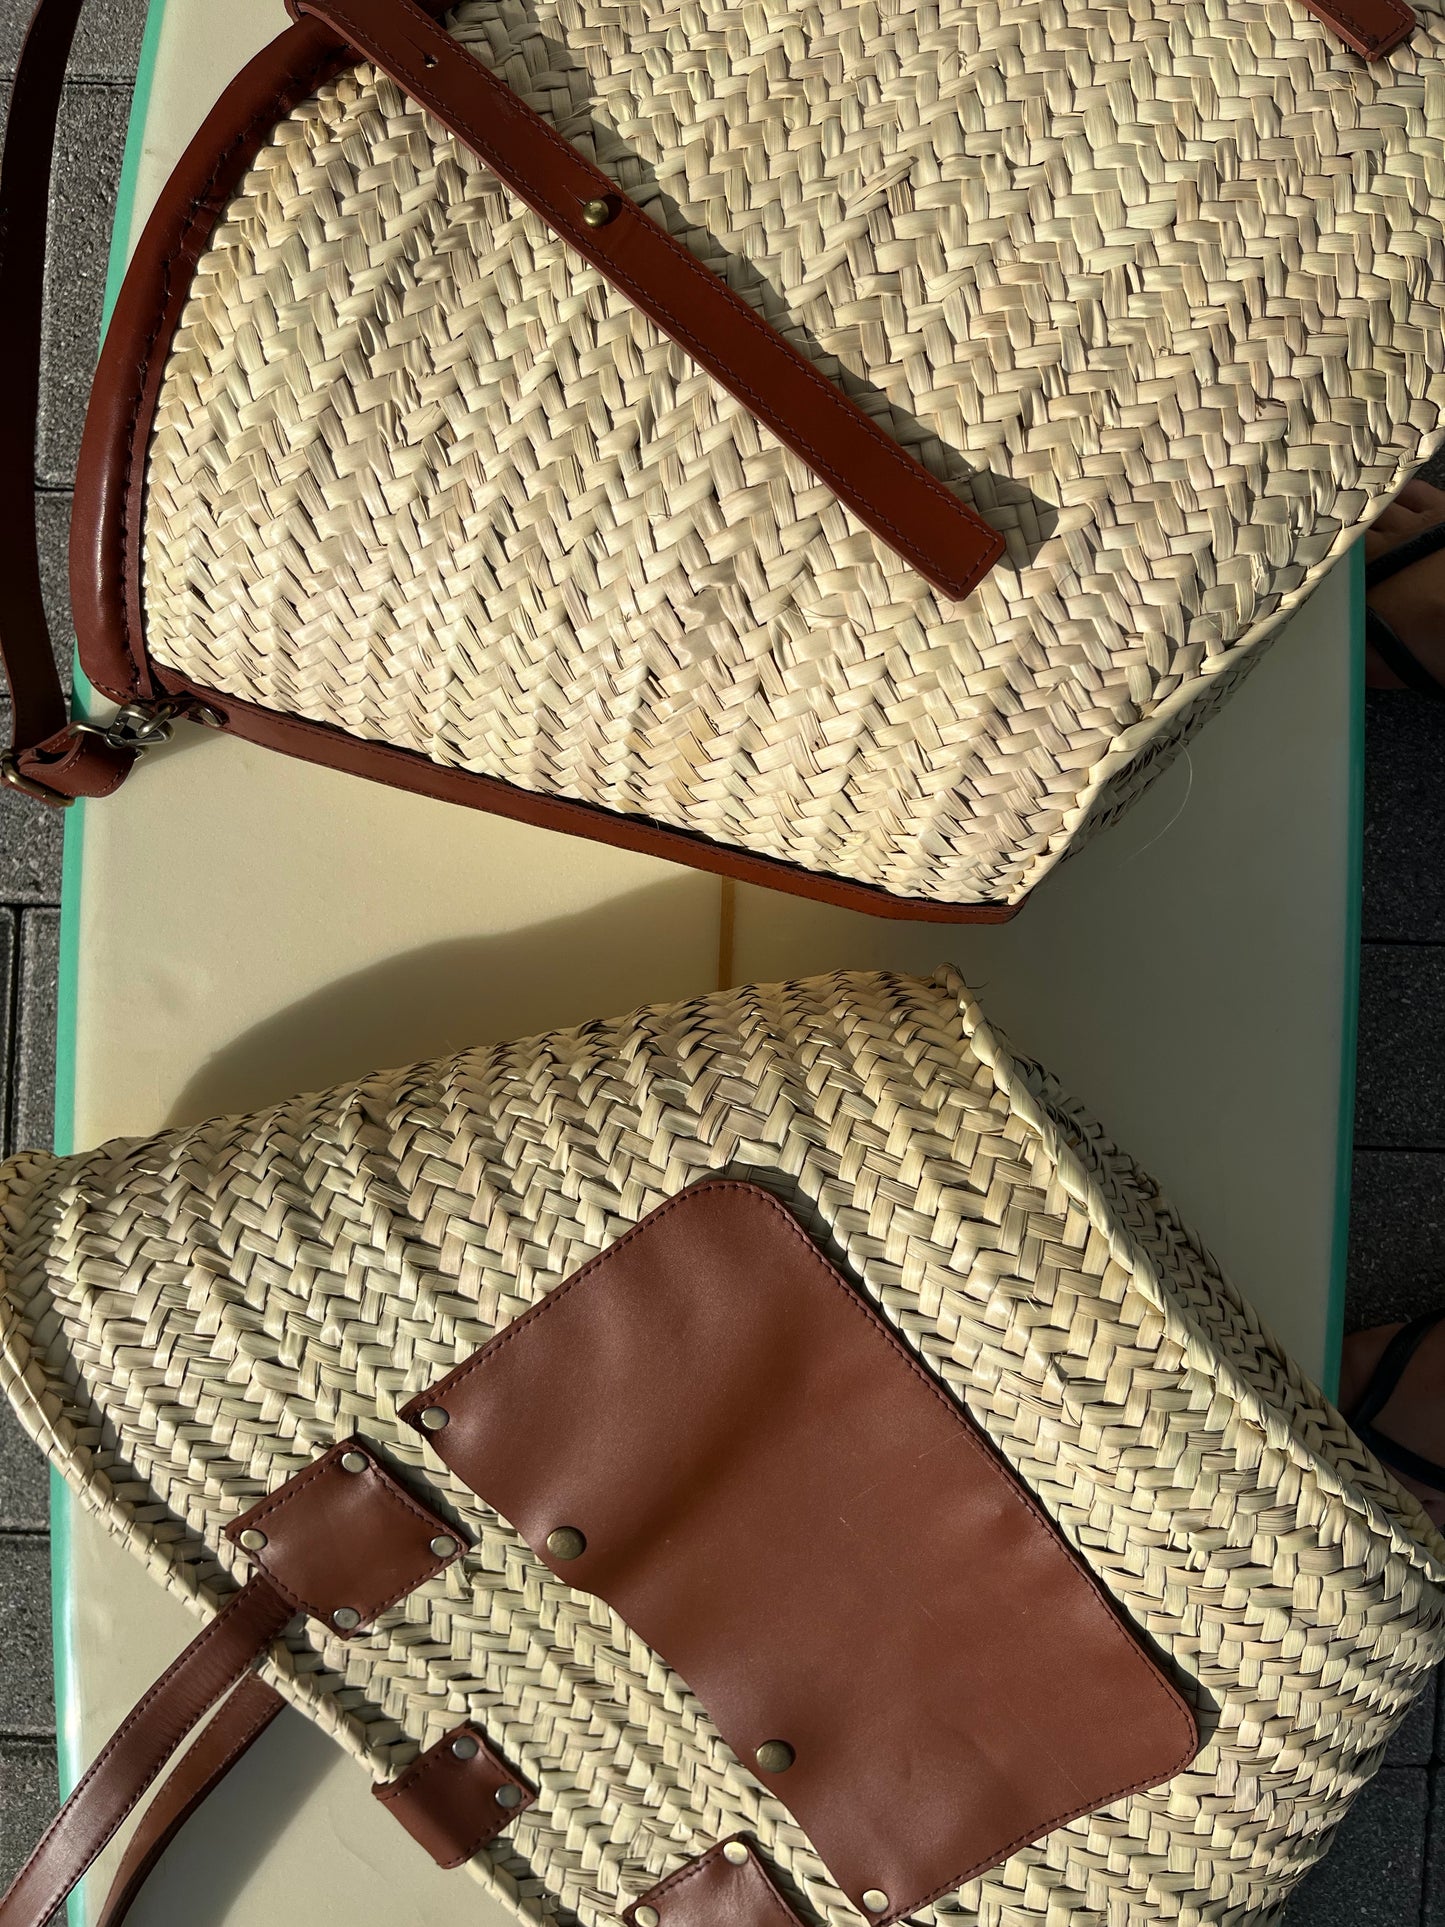 Straw Beach Bag With Leather Exterior Pocket